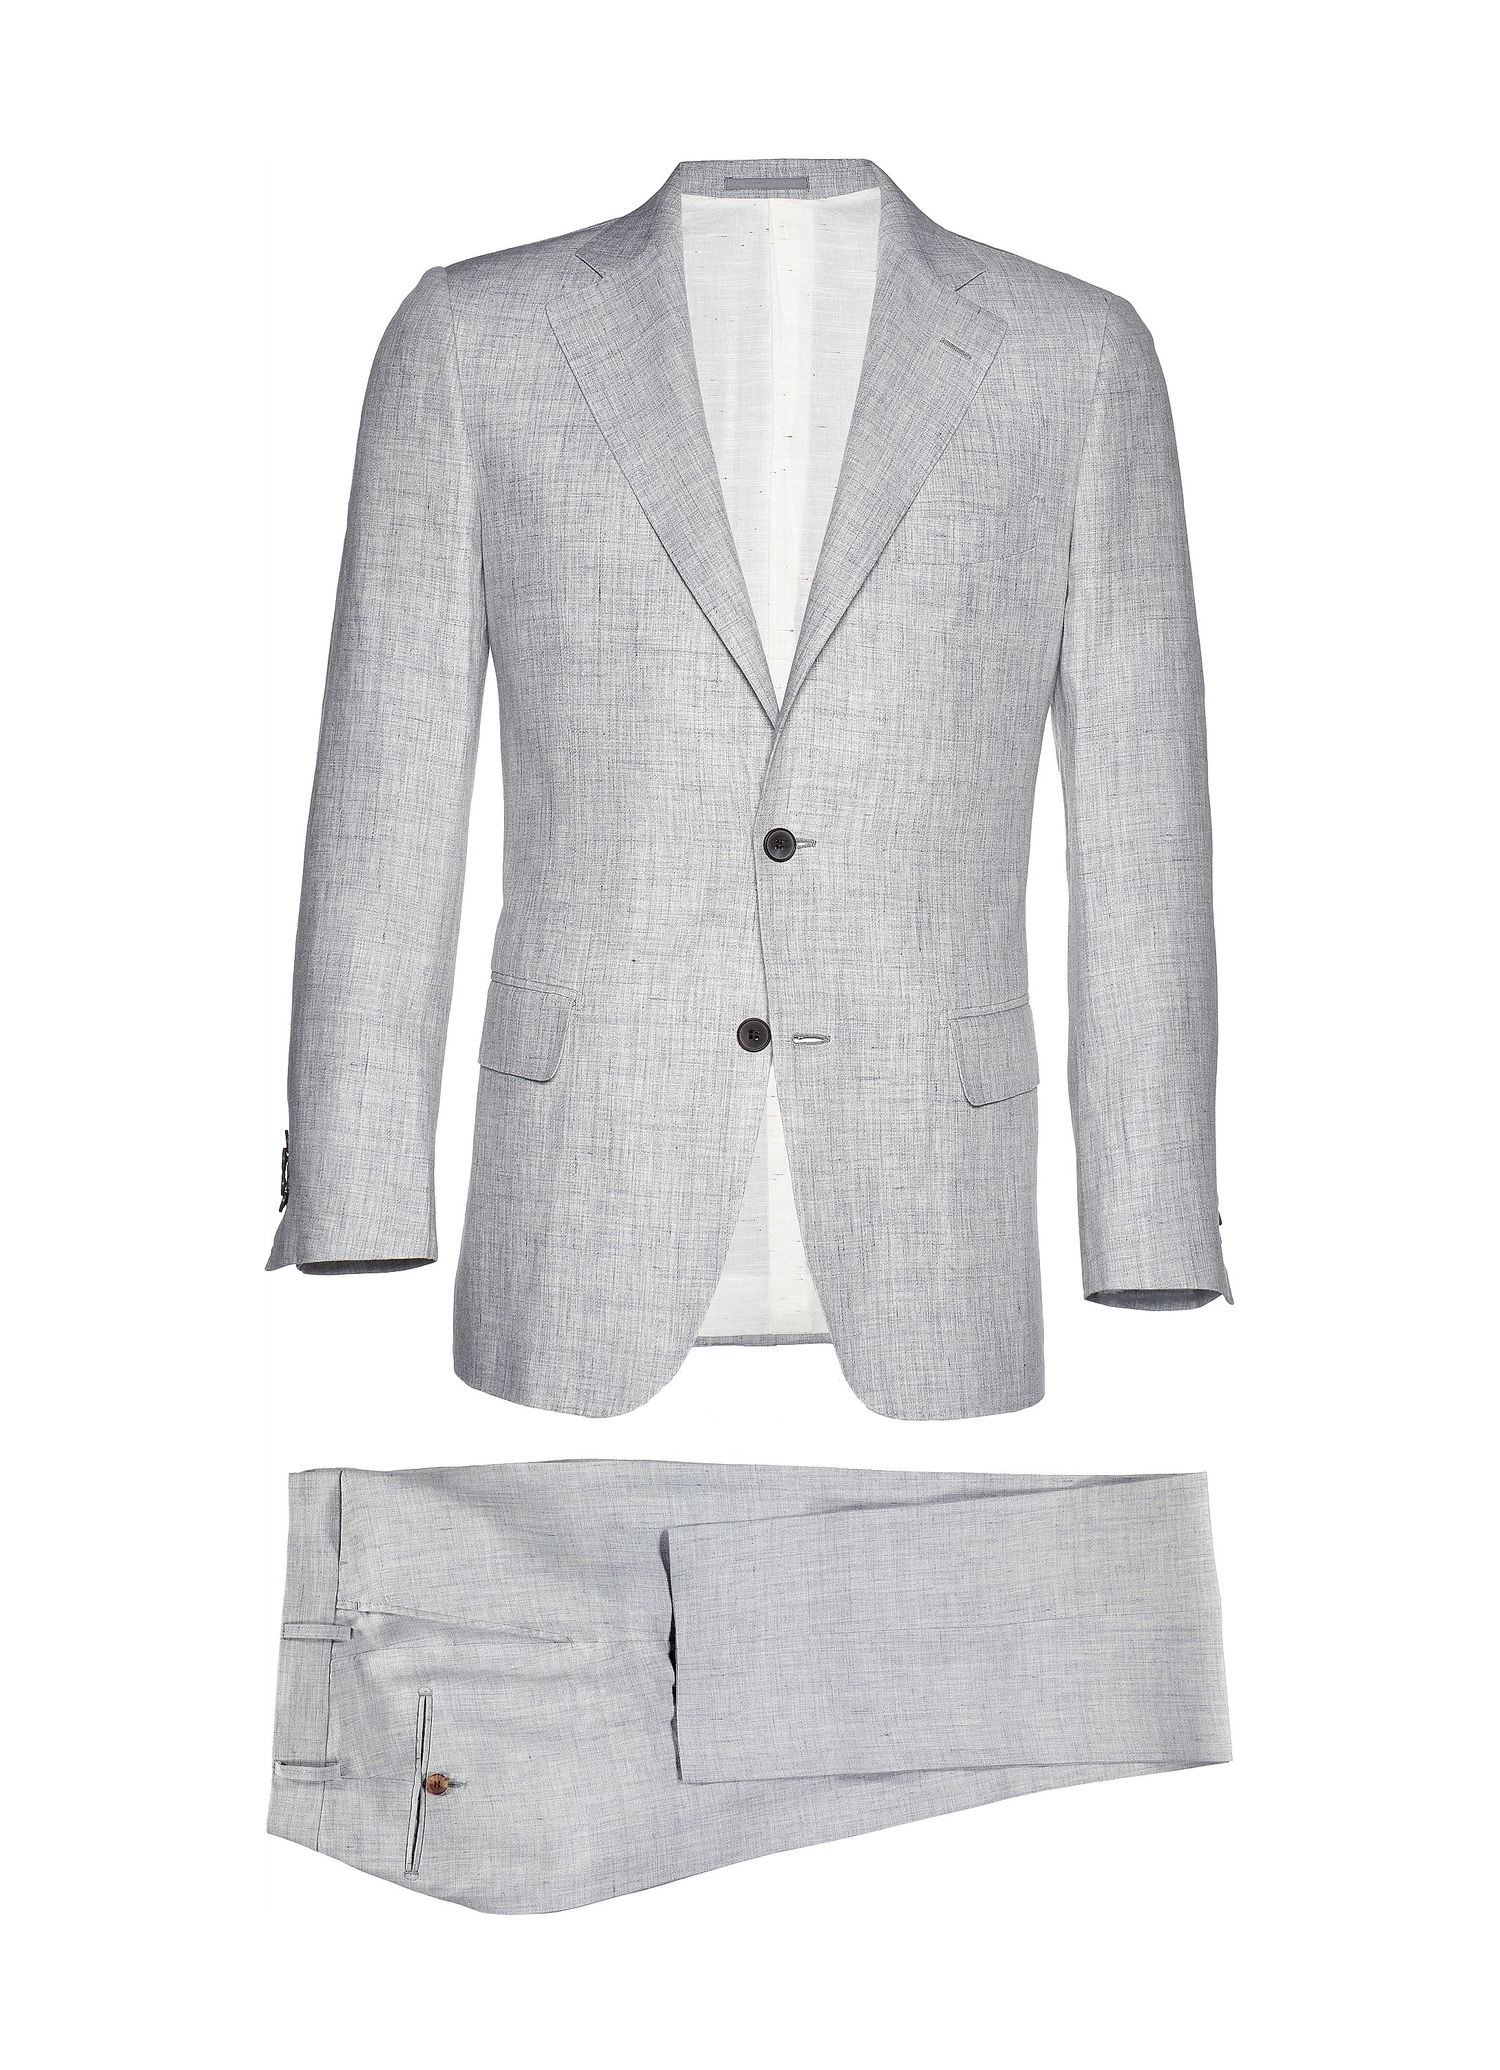 SuitSupply Spring Summer 2014 Best Items